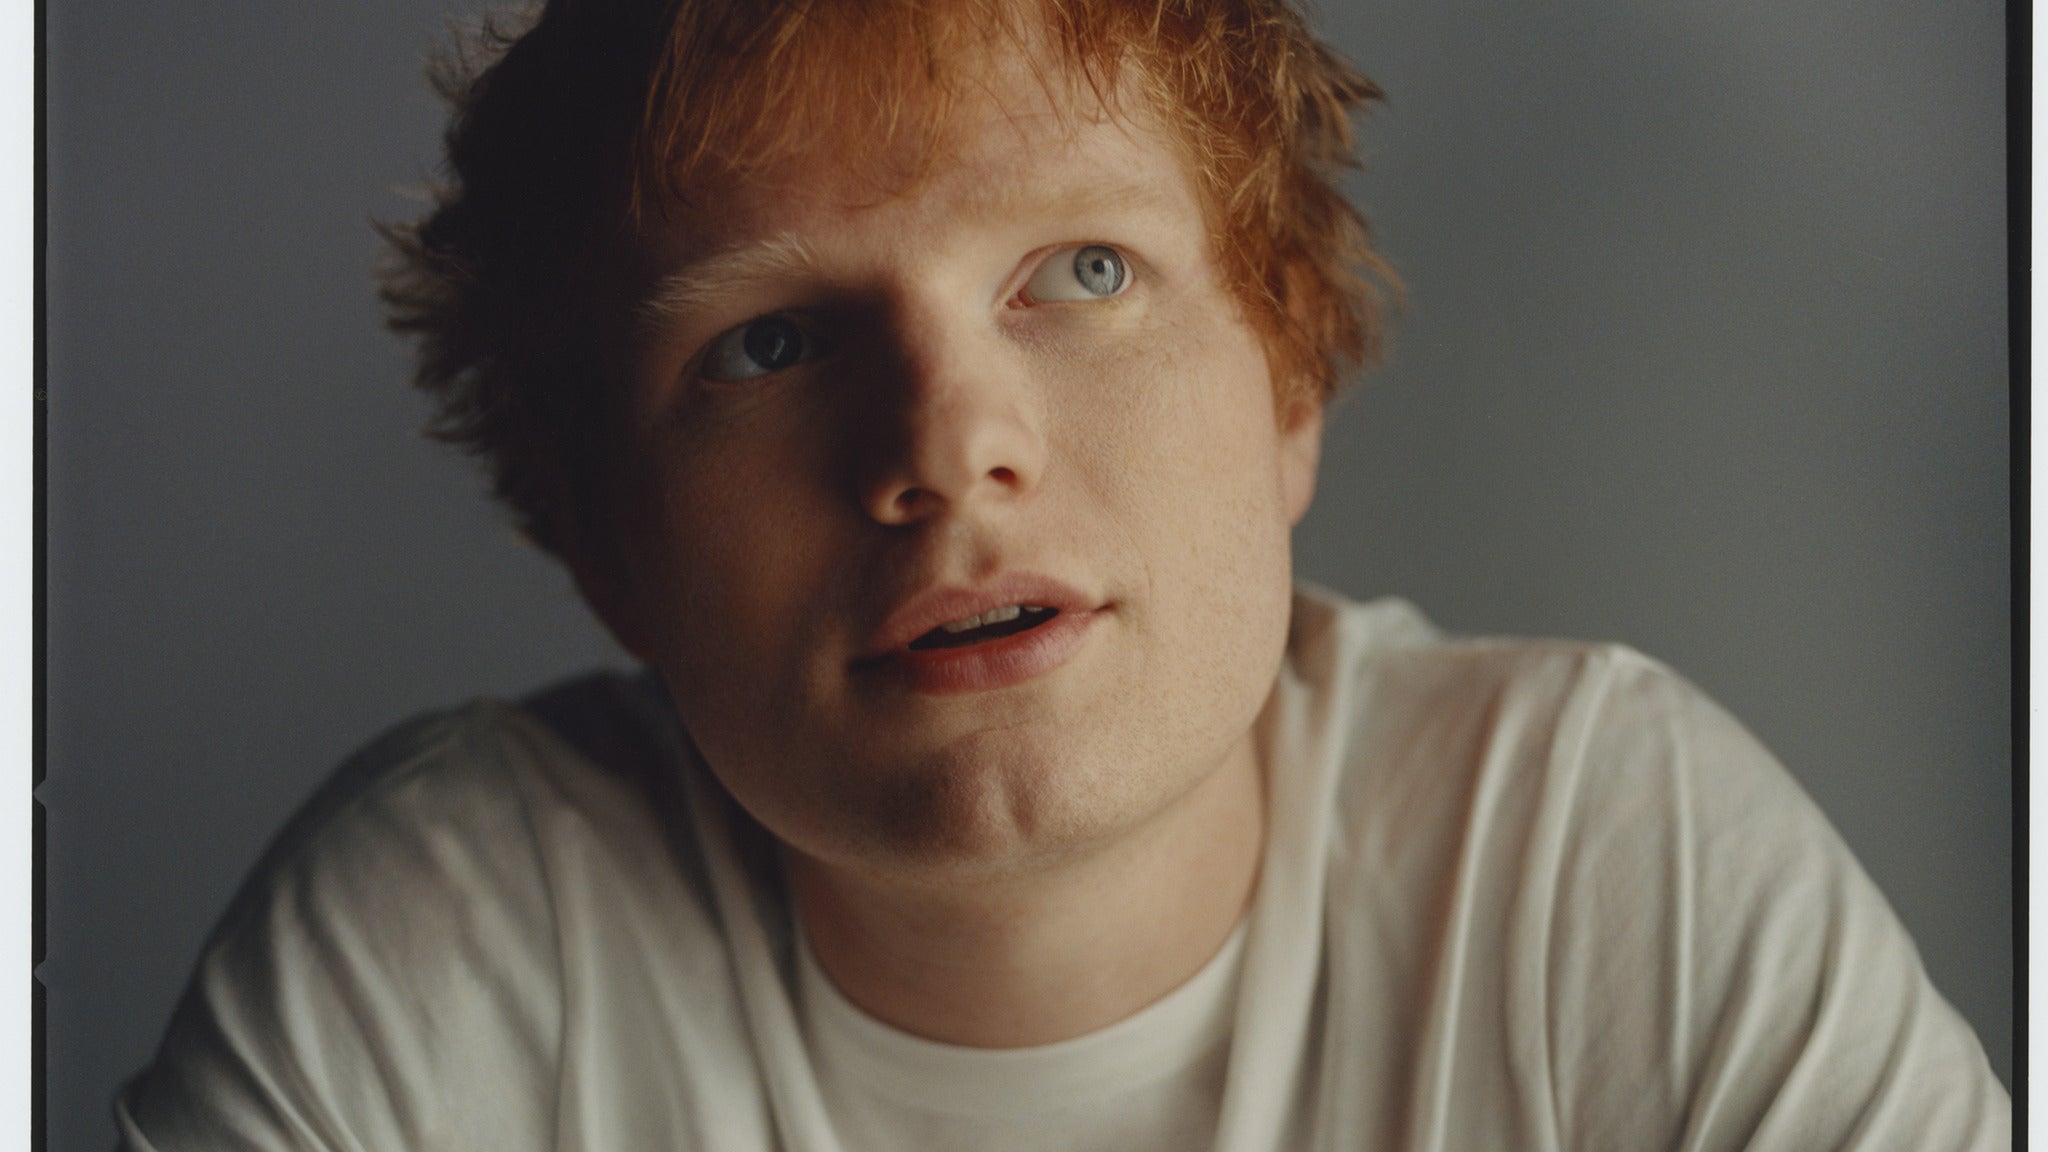 Image used with permission from Ticketmaster | Ed Sheeran + - = ÷ x Tour tickets